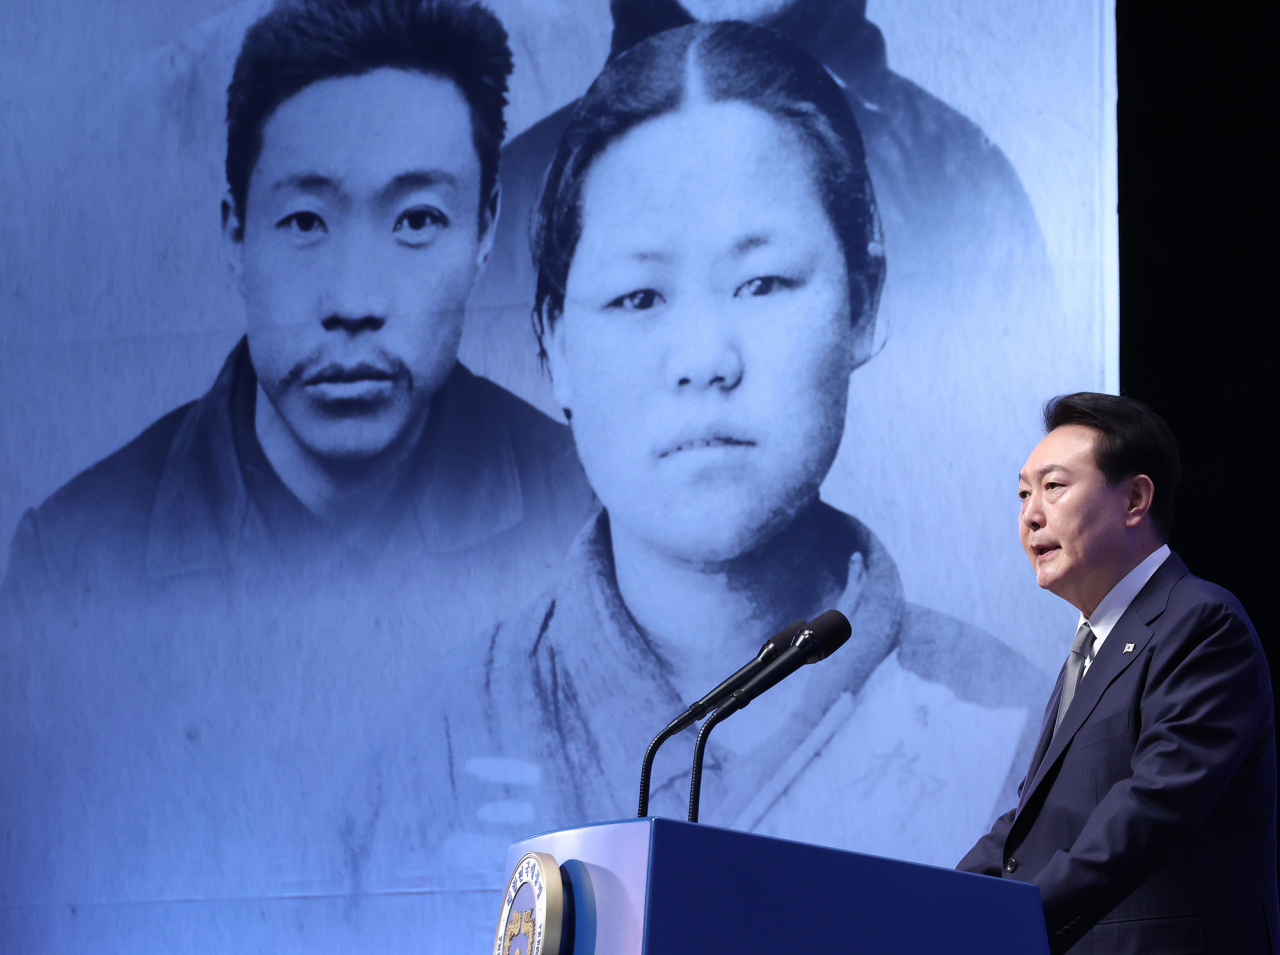 President Yoon Suk Yeol gives a commemorative speech at the 104th anniversary of the March 1 Independence Movement Day held at the Yu Gwan-sun Memorial Hall in Jung-gu, Seoul, on March 1. (Yonhap)